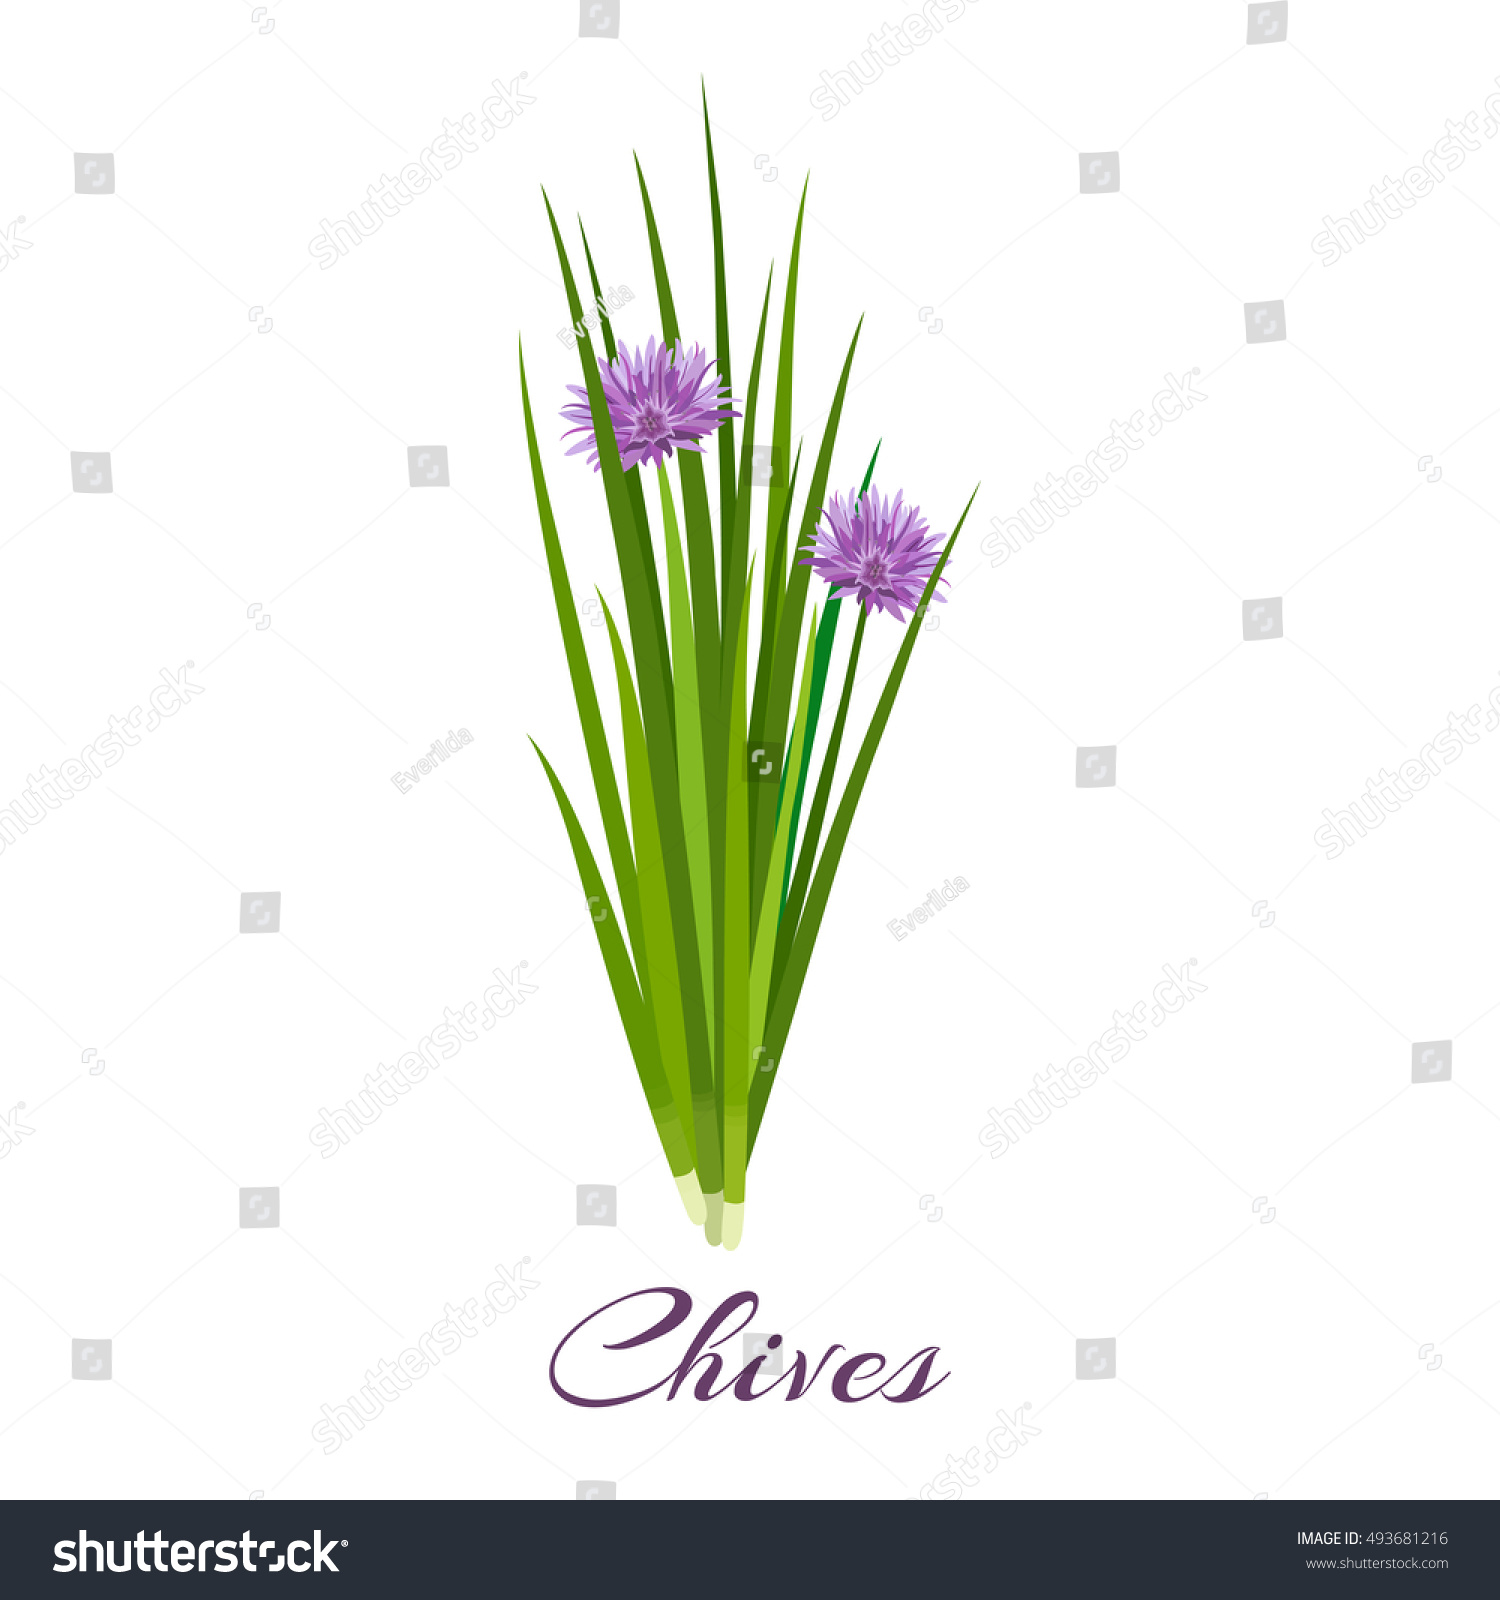 SVG of Blossoming chives color vector illustration. Allium schoenoprasum or garlic chives. Isolated on a white background. French cuisine. For web, menu, logo, textile svg